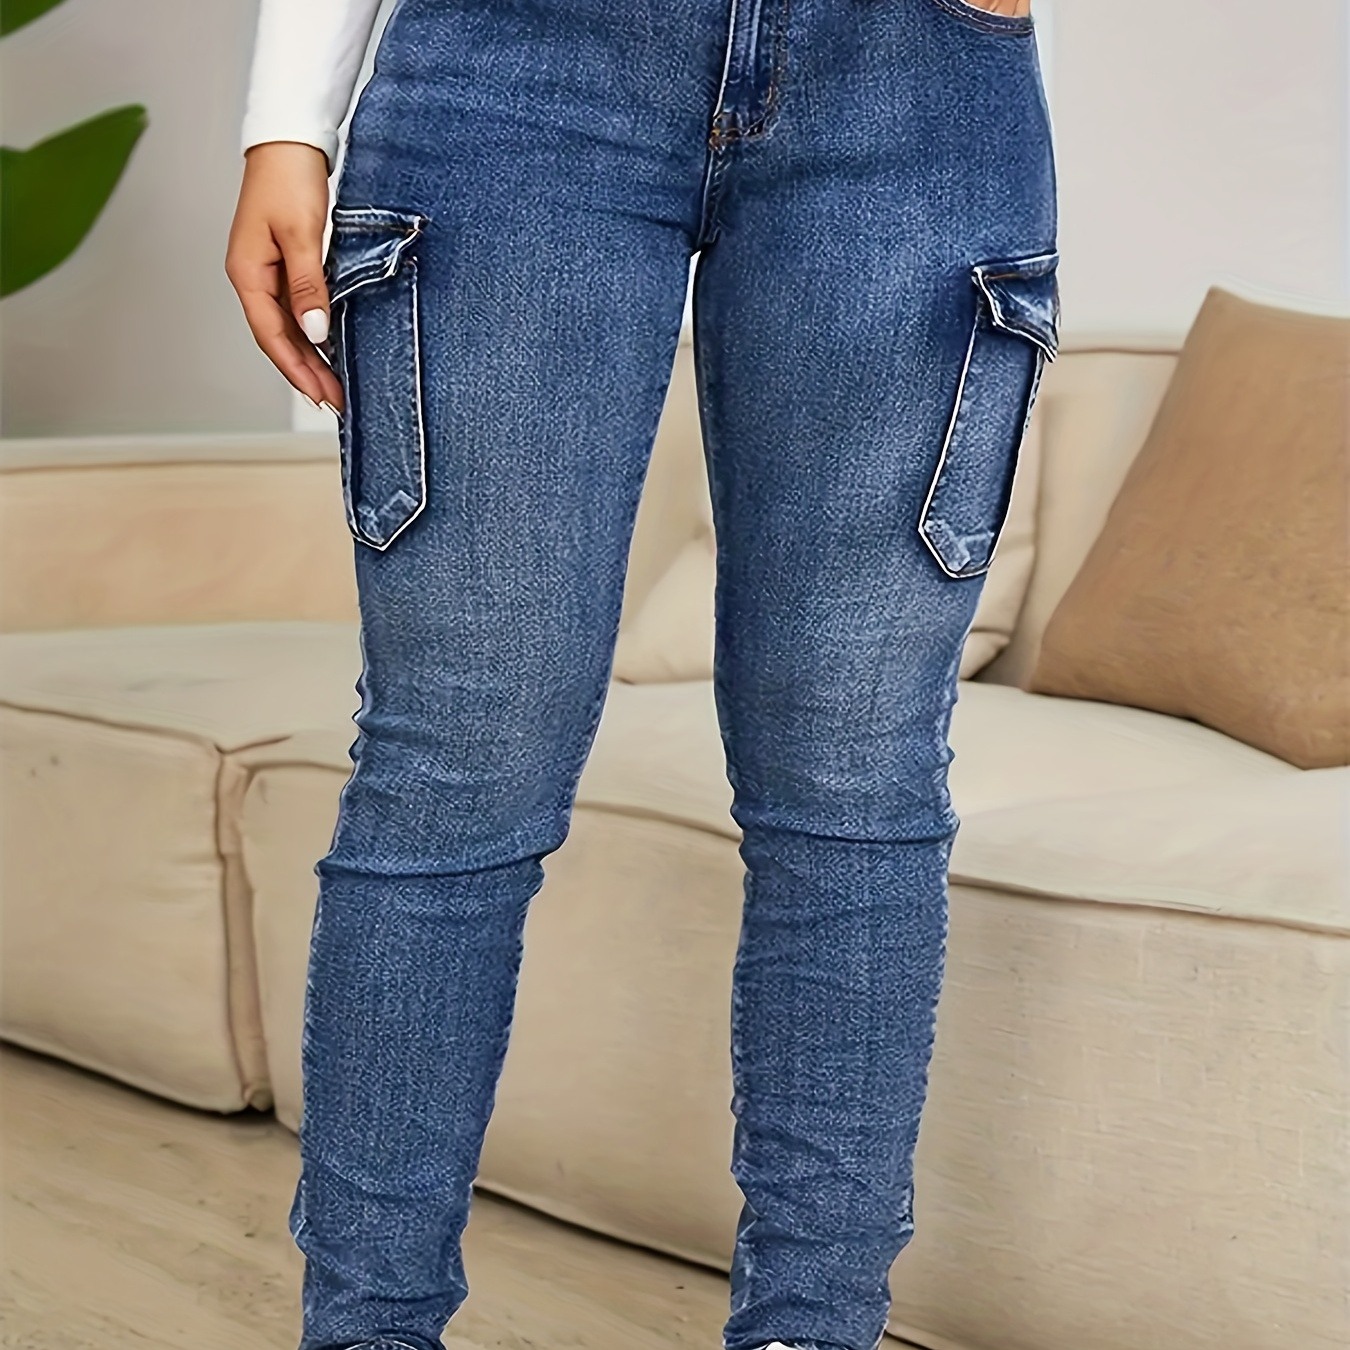 

Women's High Waisted Stretchy Denim Cargo Jeans, Deep Blue, Casual Style, Slim Fit With Side Pockets, Versatile Fashion For Daily Wear For Fall & Winter